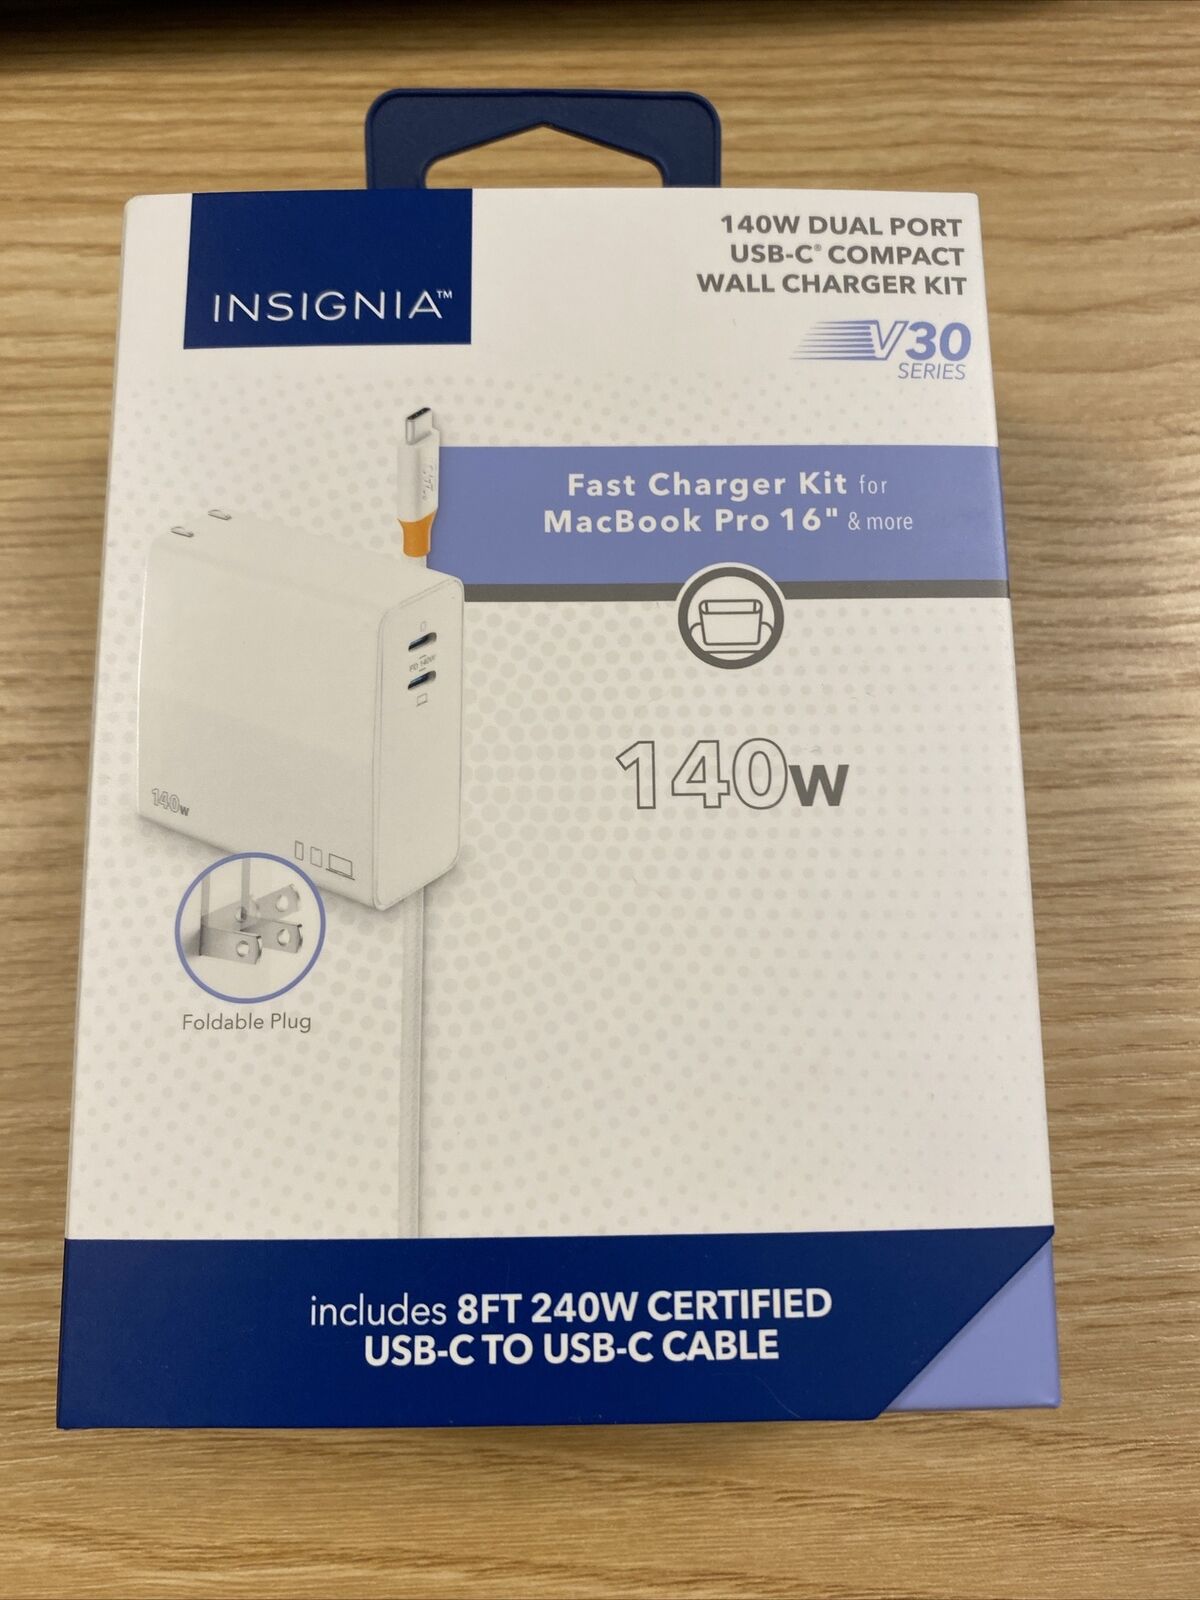 Insignia- 140W fast charging kit for Macbook pro 16 8ft 240w certified BRAND NEW